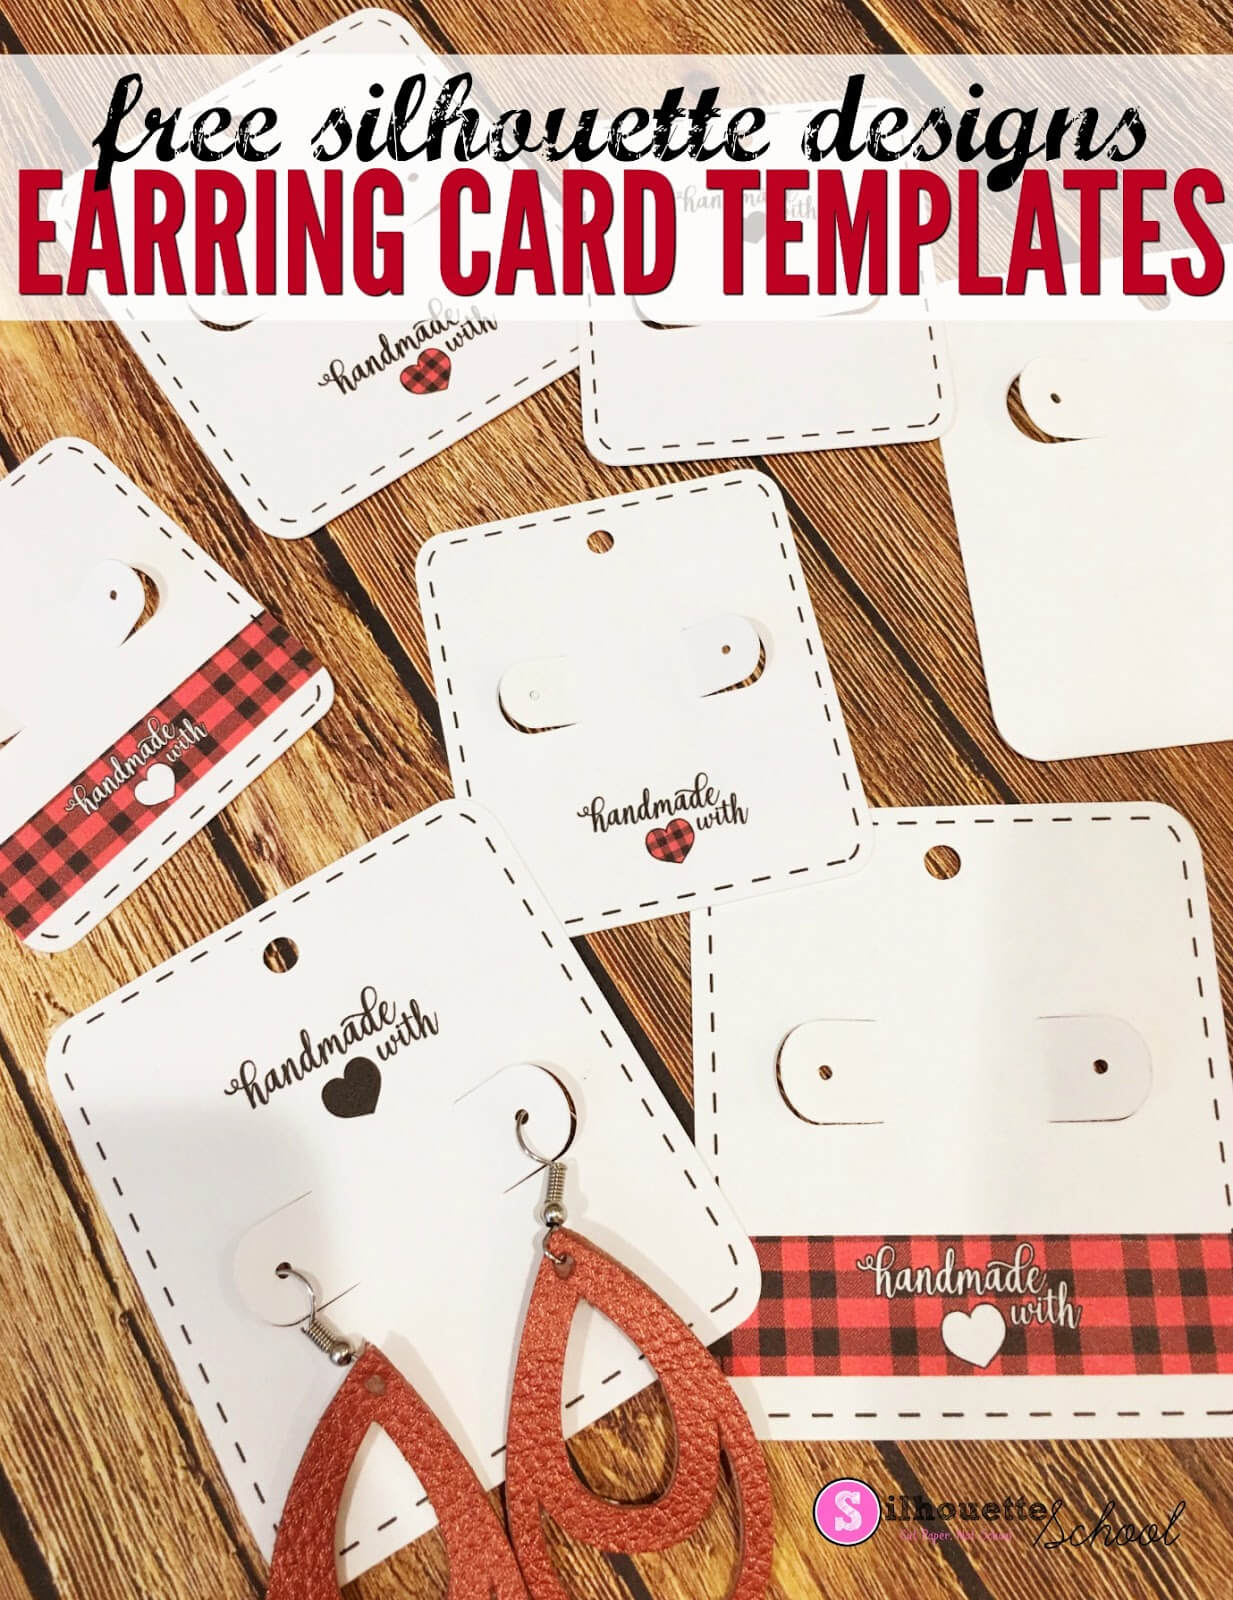 Free Silhouette Earring Card Templates (Set Of 8 Inside Free Svg Card Templates